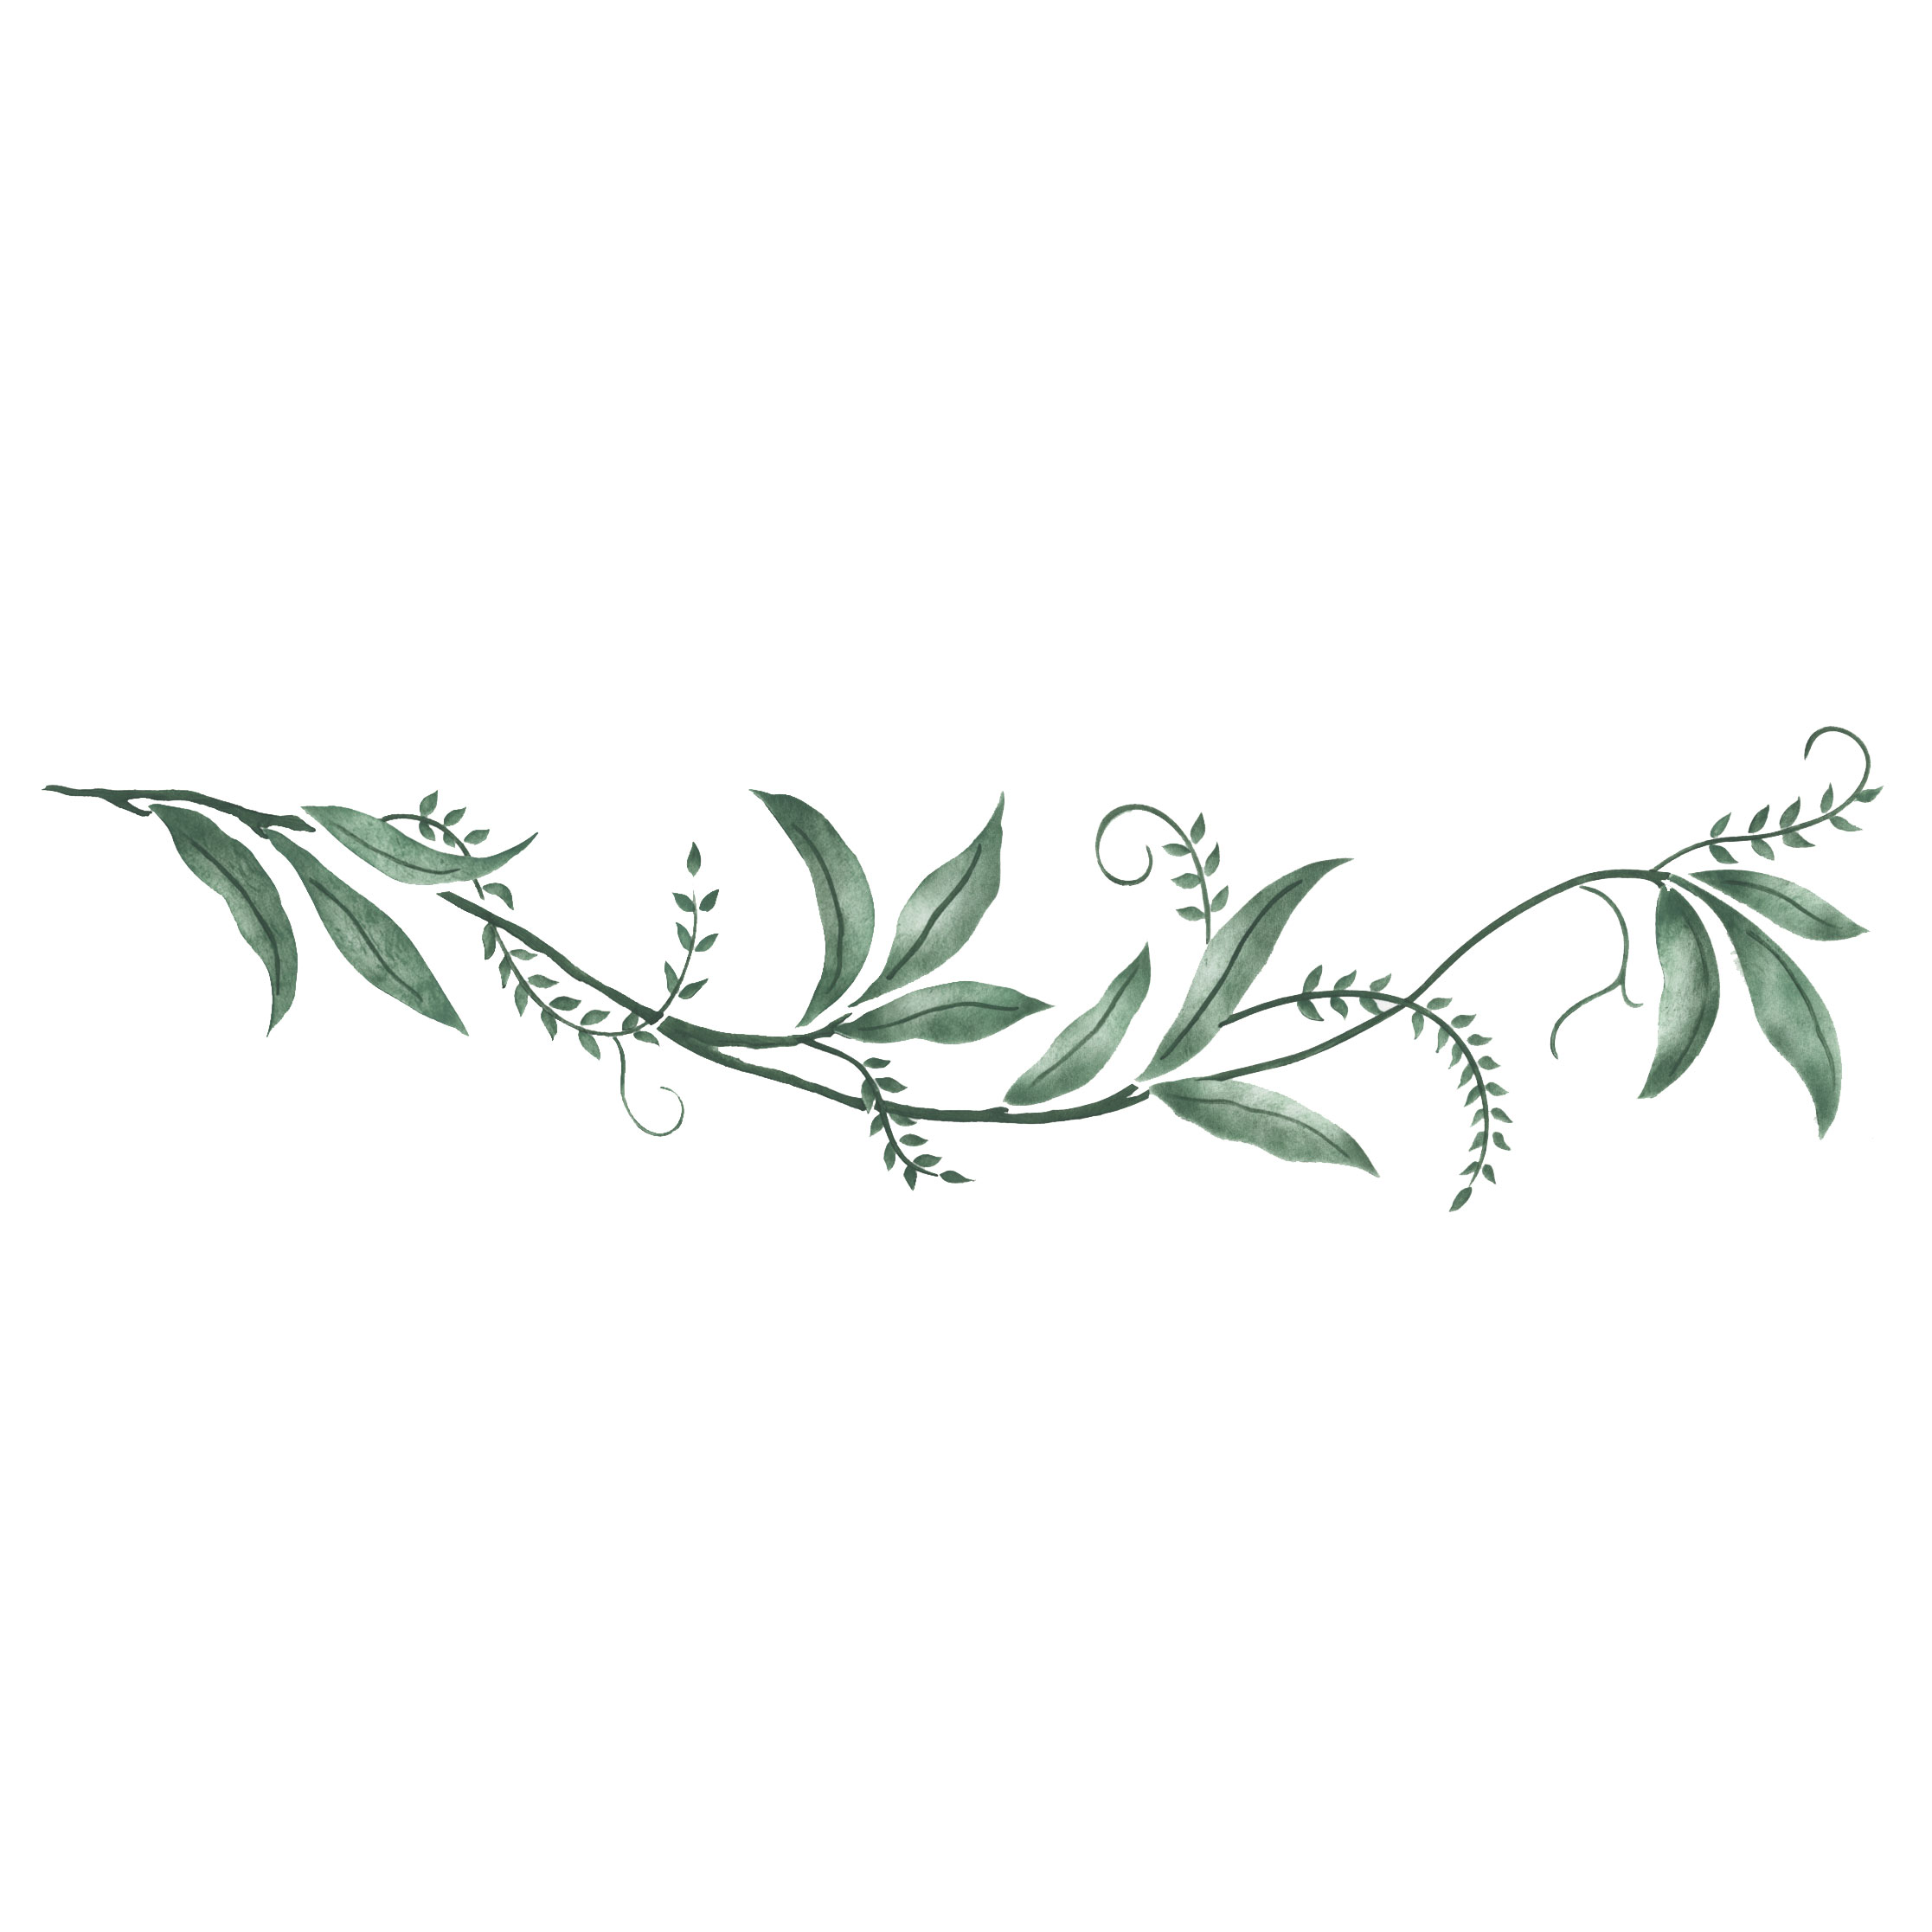 Stem and Leaf Flower stencils for fence painting, wall stenciling